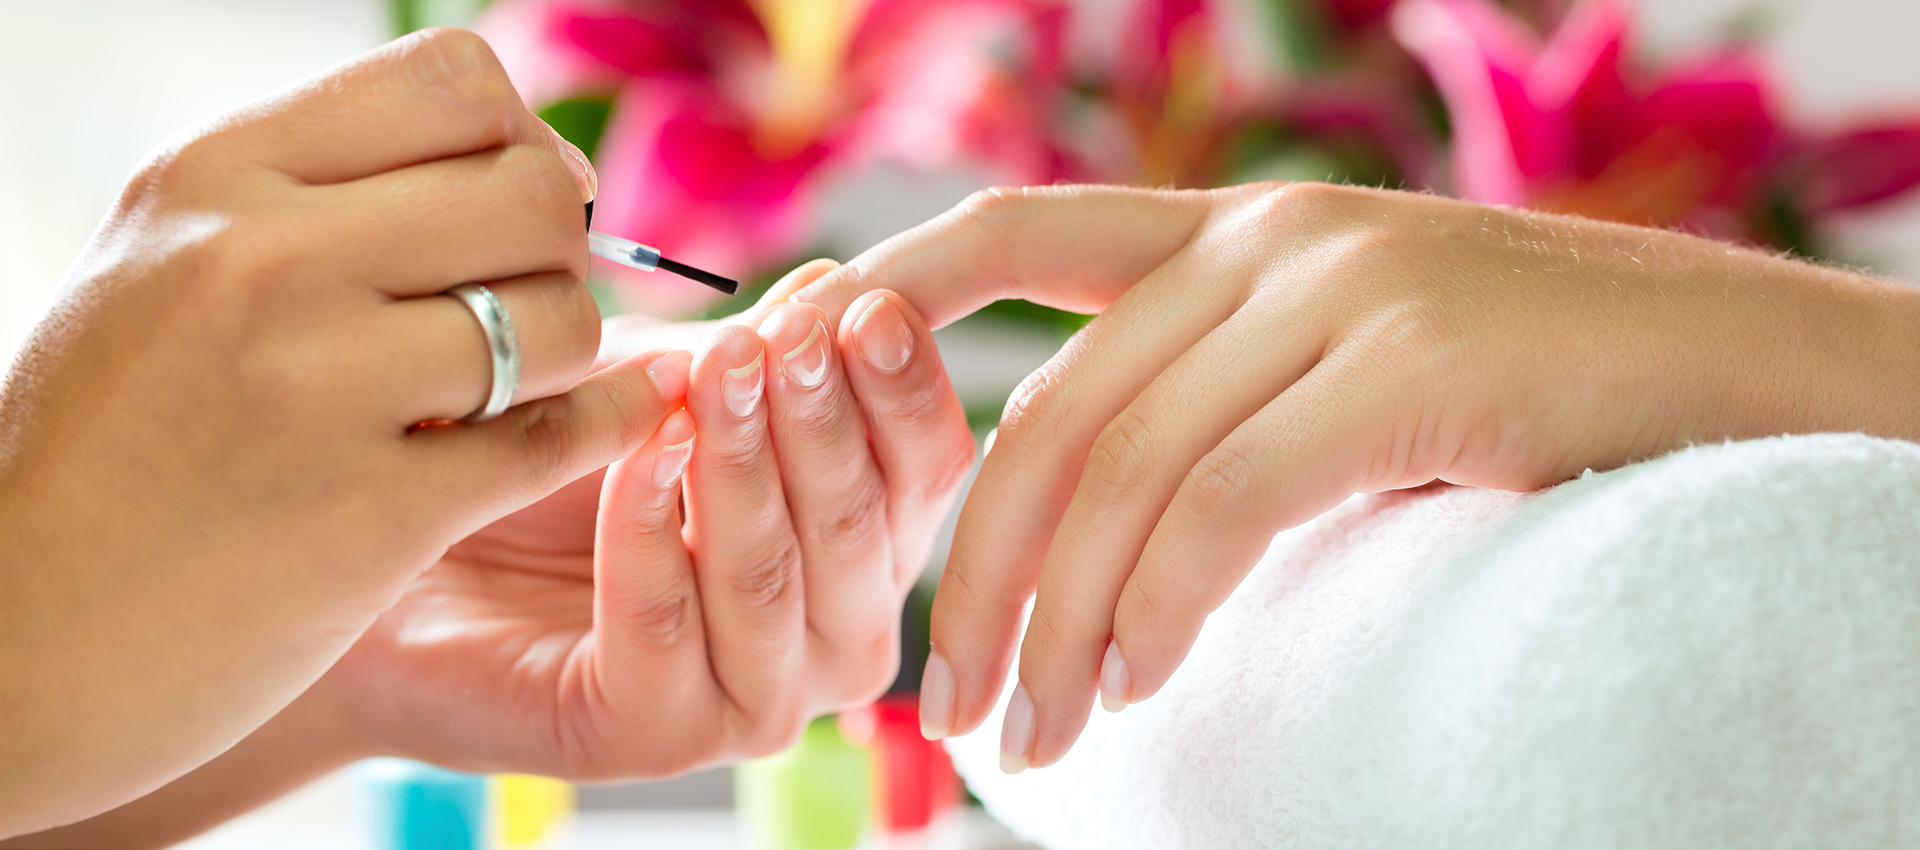 T B Nice One Nails: Nails, Waxing and Pedicures in Calgary and Chestermere